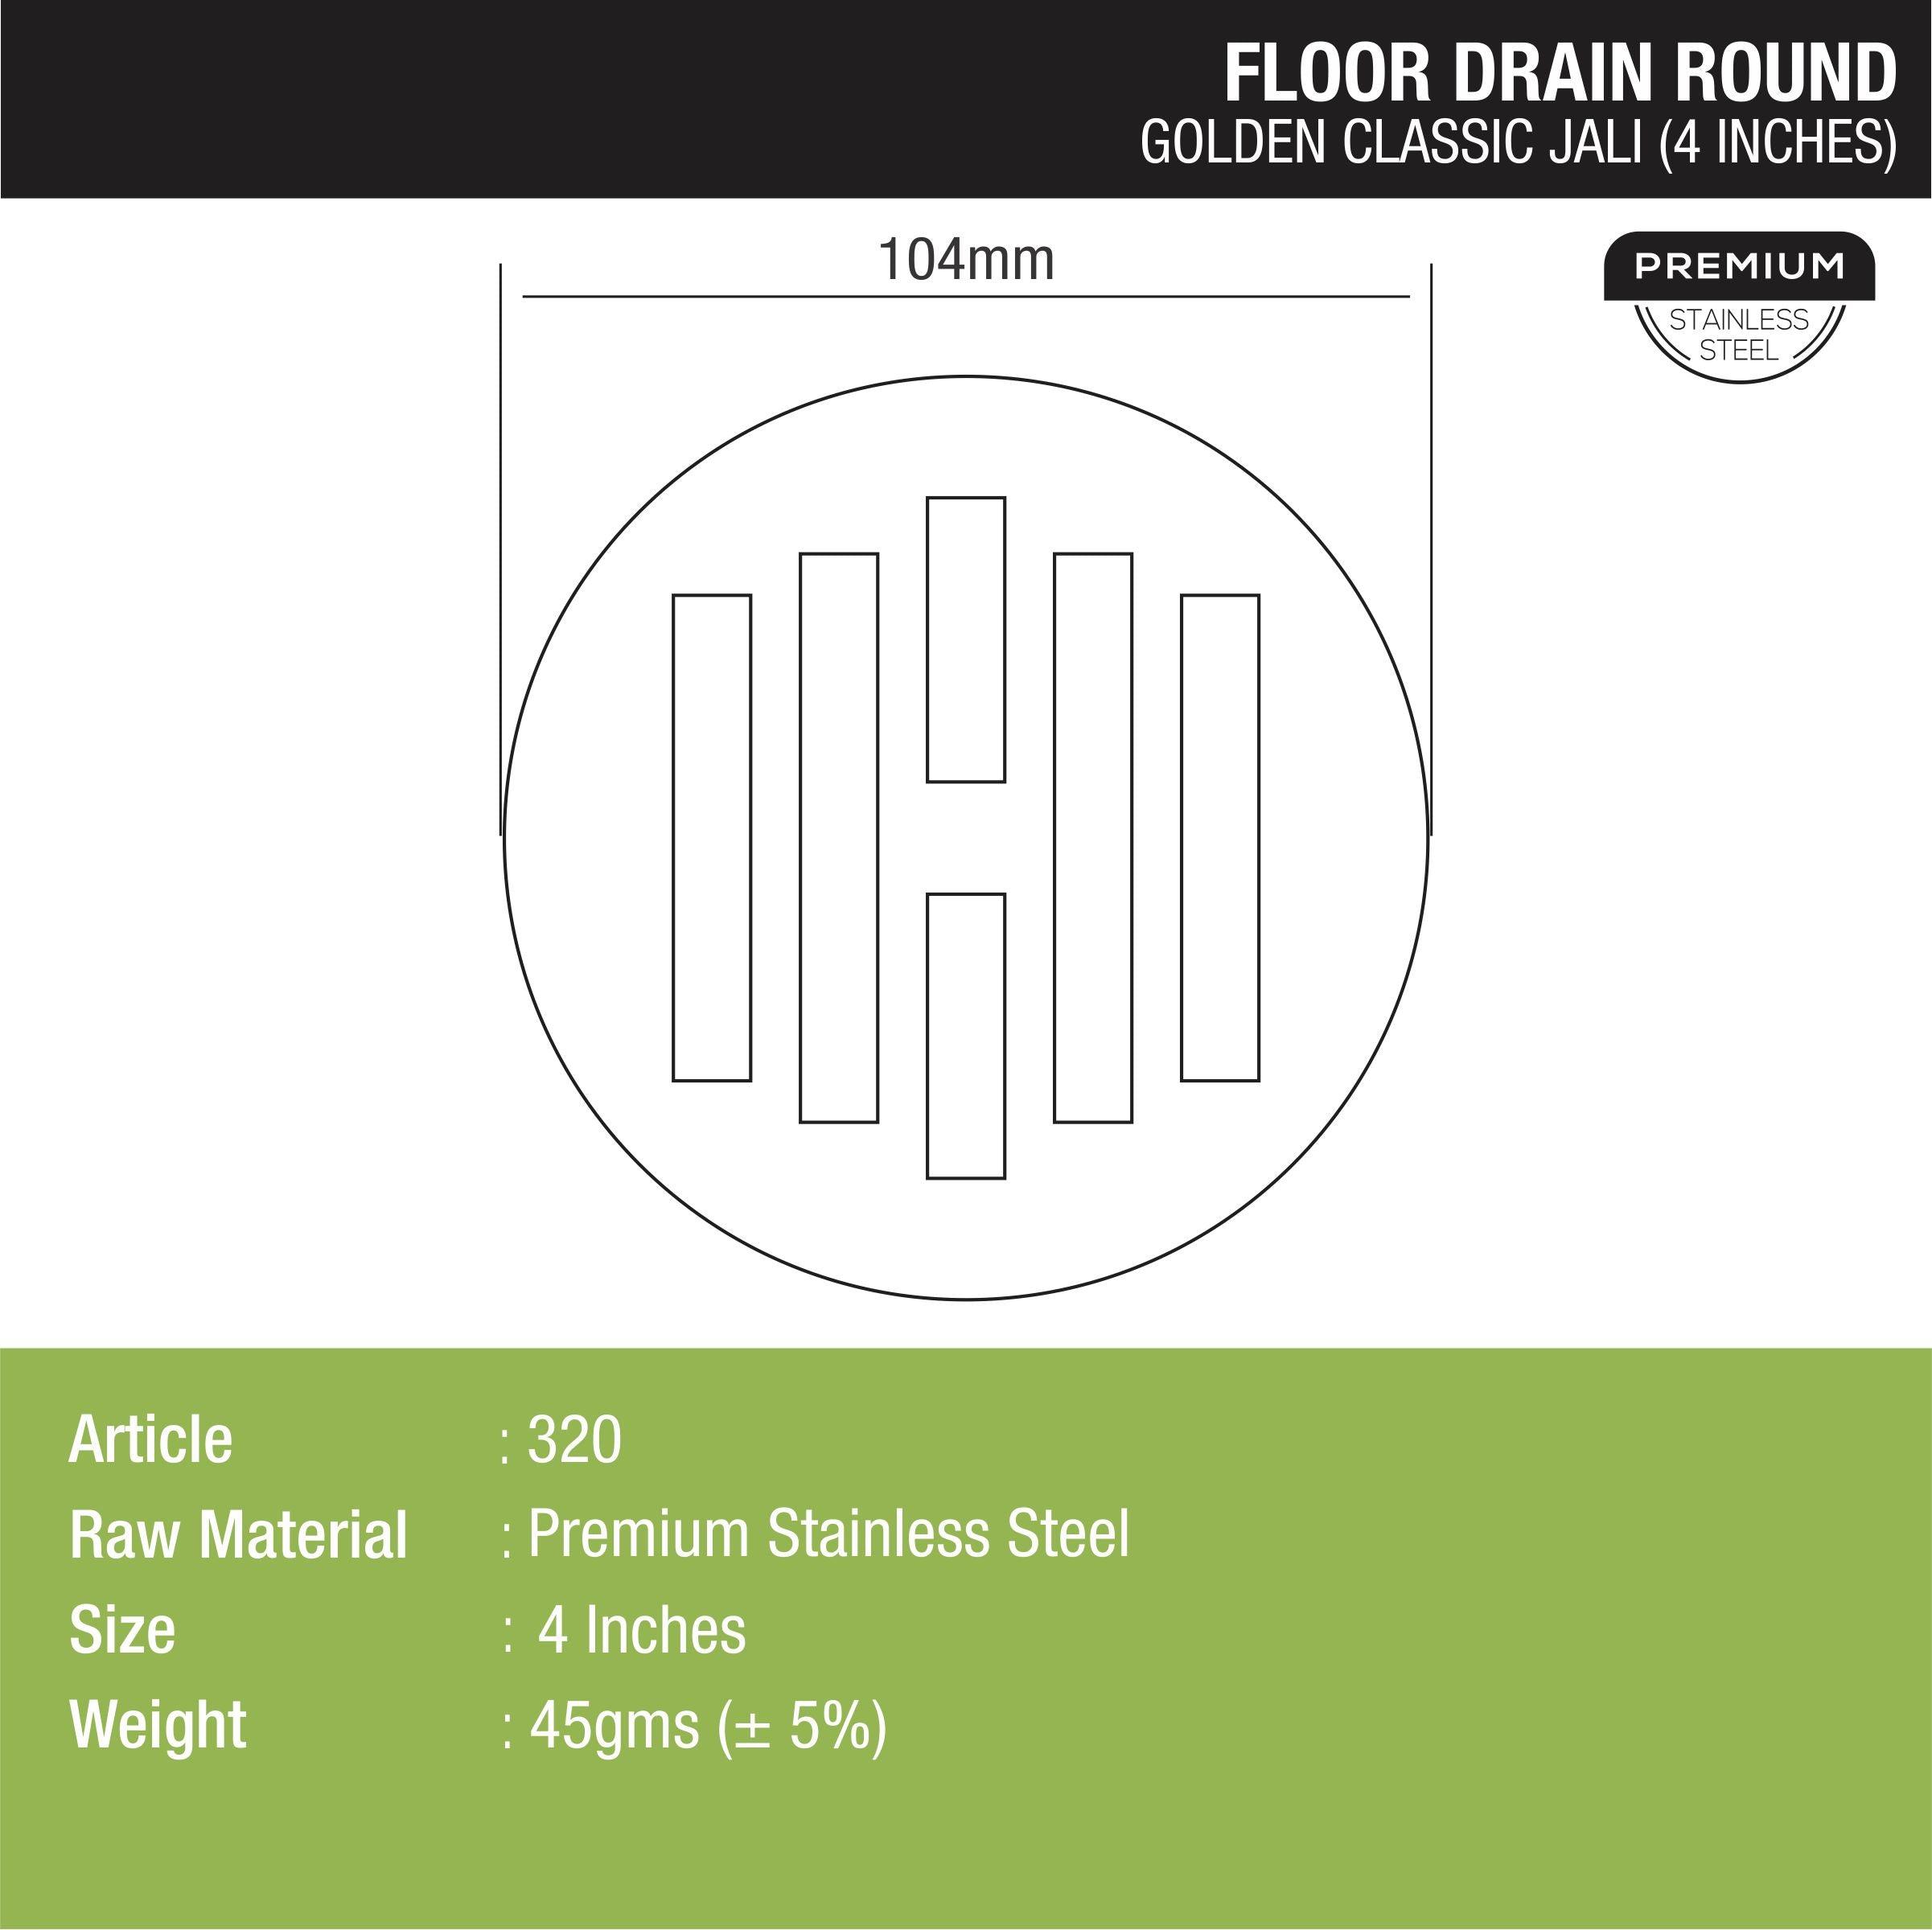 Golden Classic Jali Round Floor Drain (4 inches) dimensions and sizes